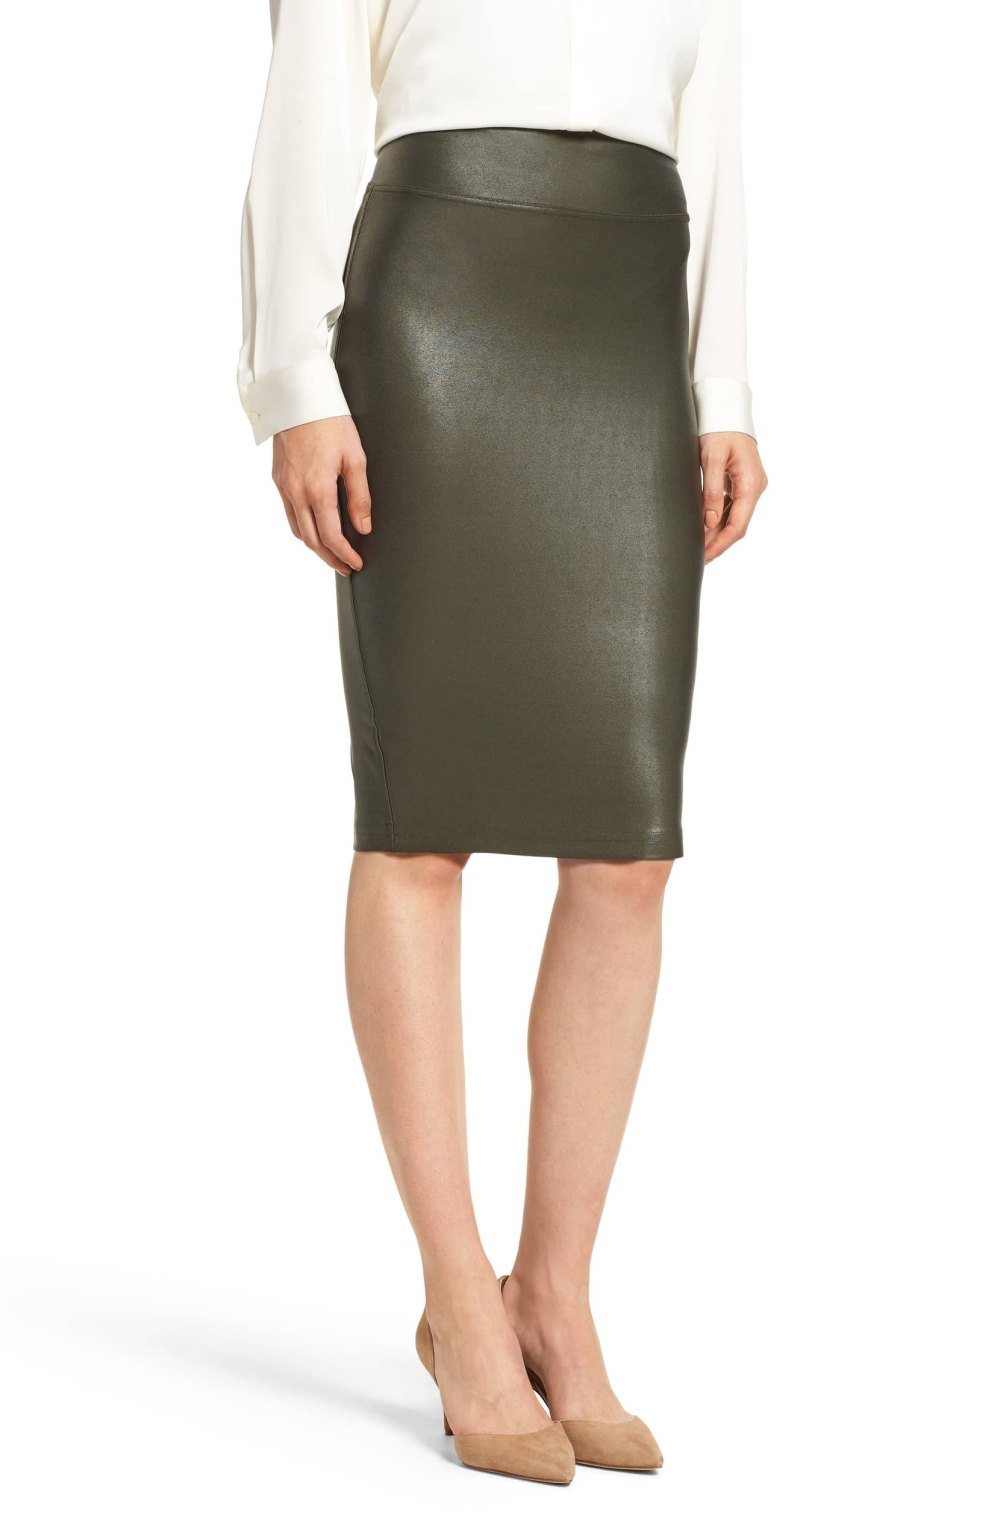 Shop This Spanx Faux Leather Skirt for Chic Shapewear Apparel